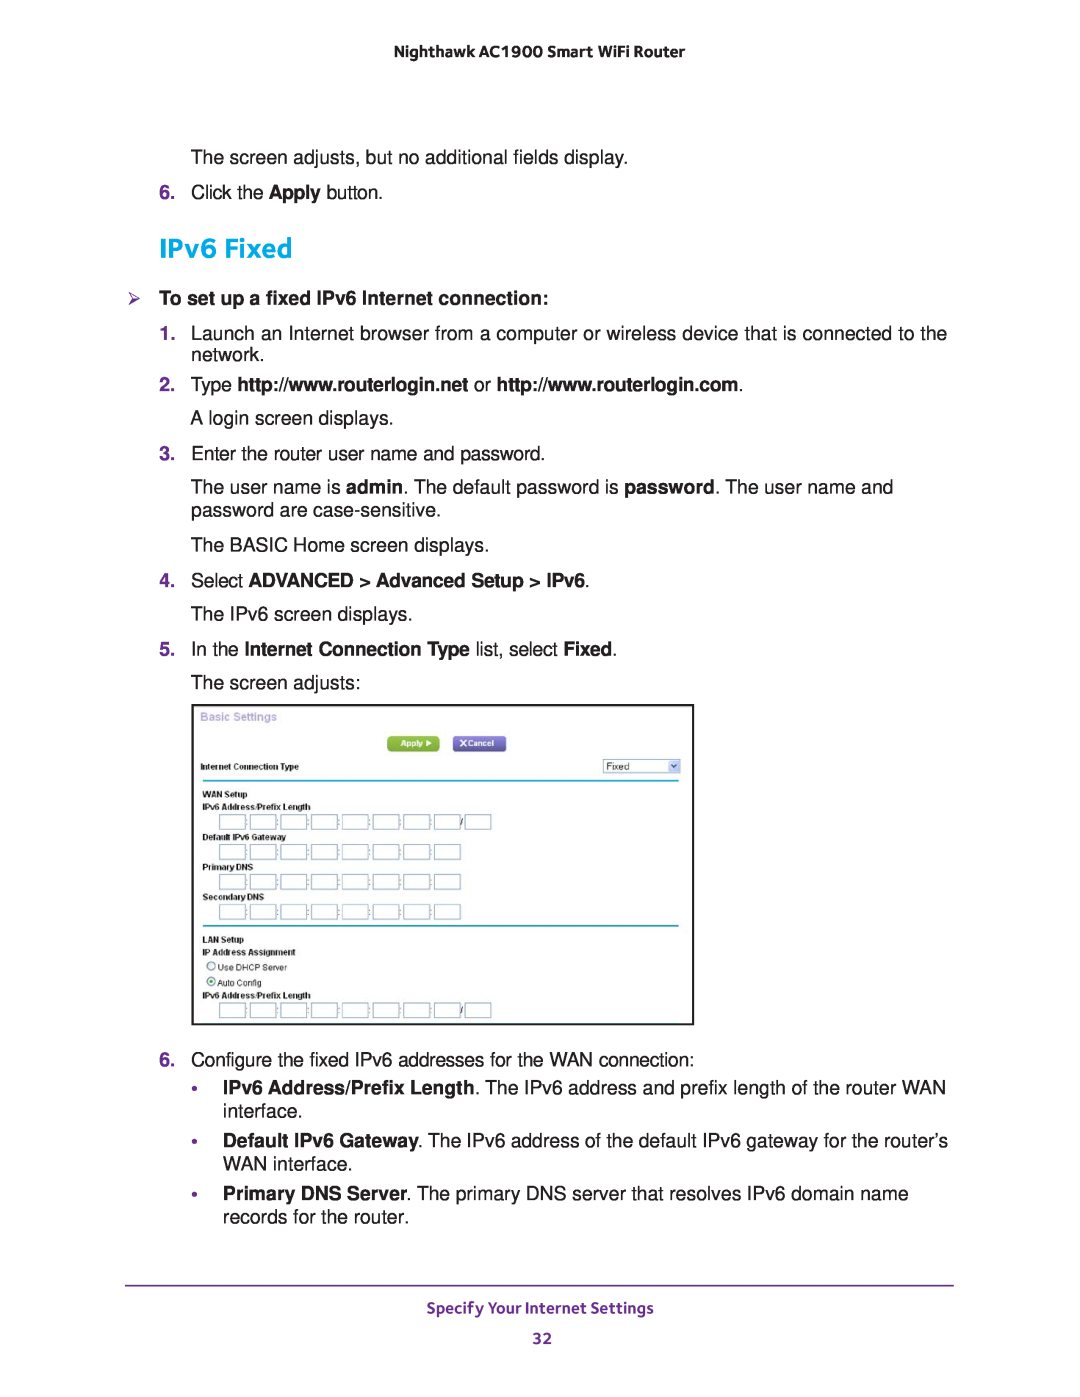 NETGEAR Model R7000 user manual IPv6 Fixed,  To set up a fixed IPv6 Internet connection 